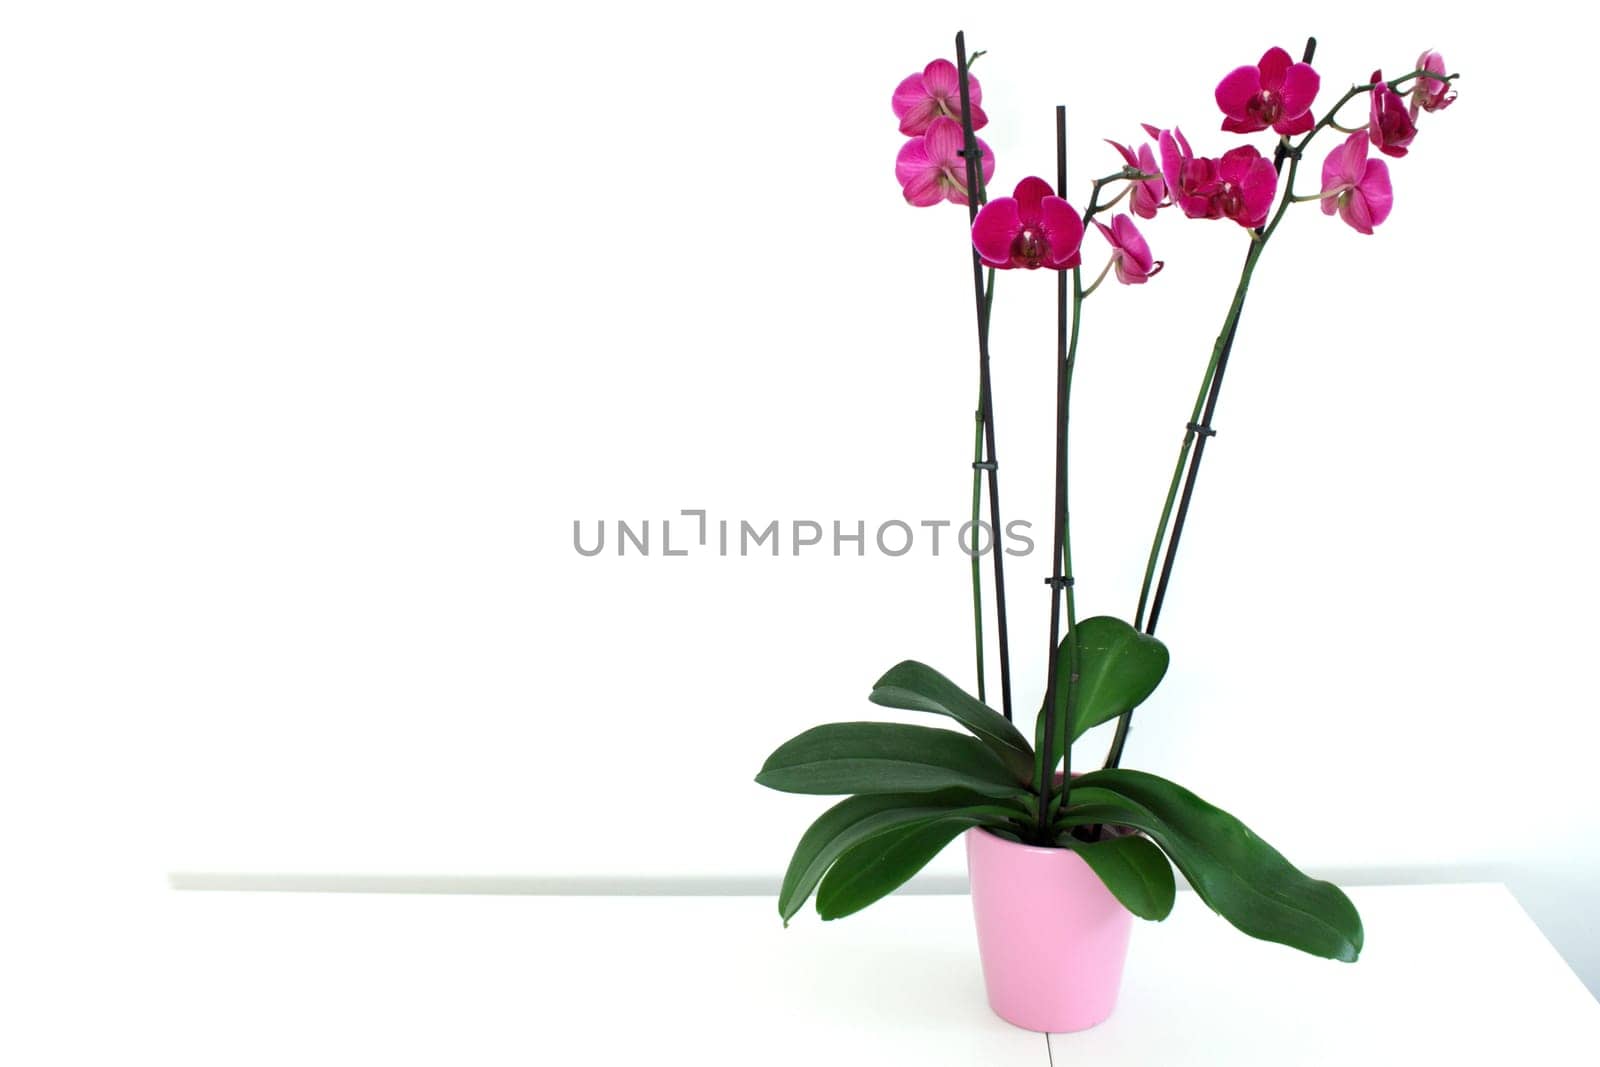 There is a vase of an orchid with burgundy flowers on a white table. High quality photo